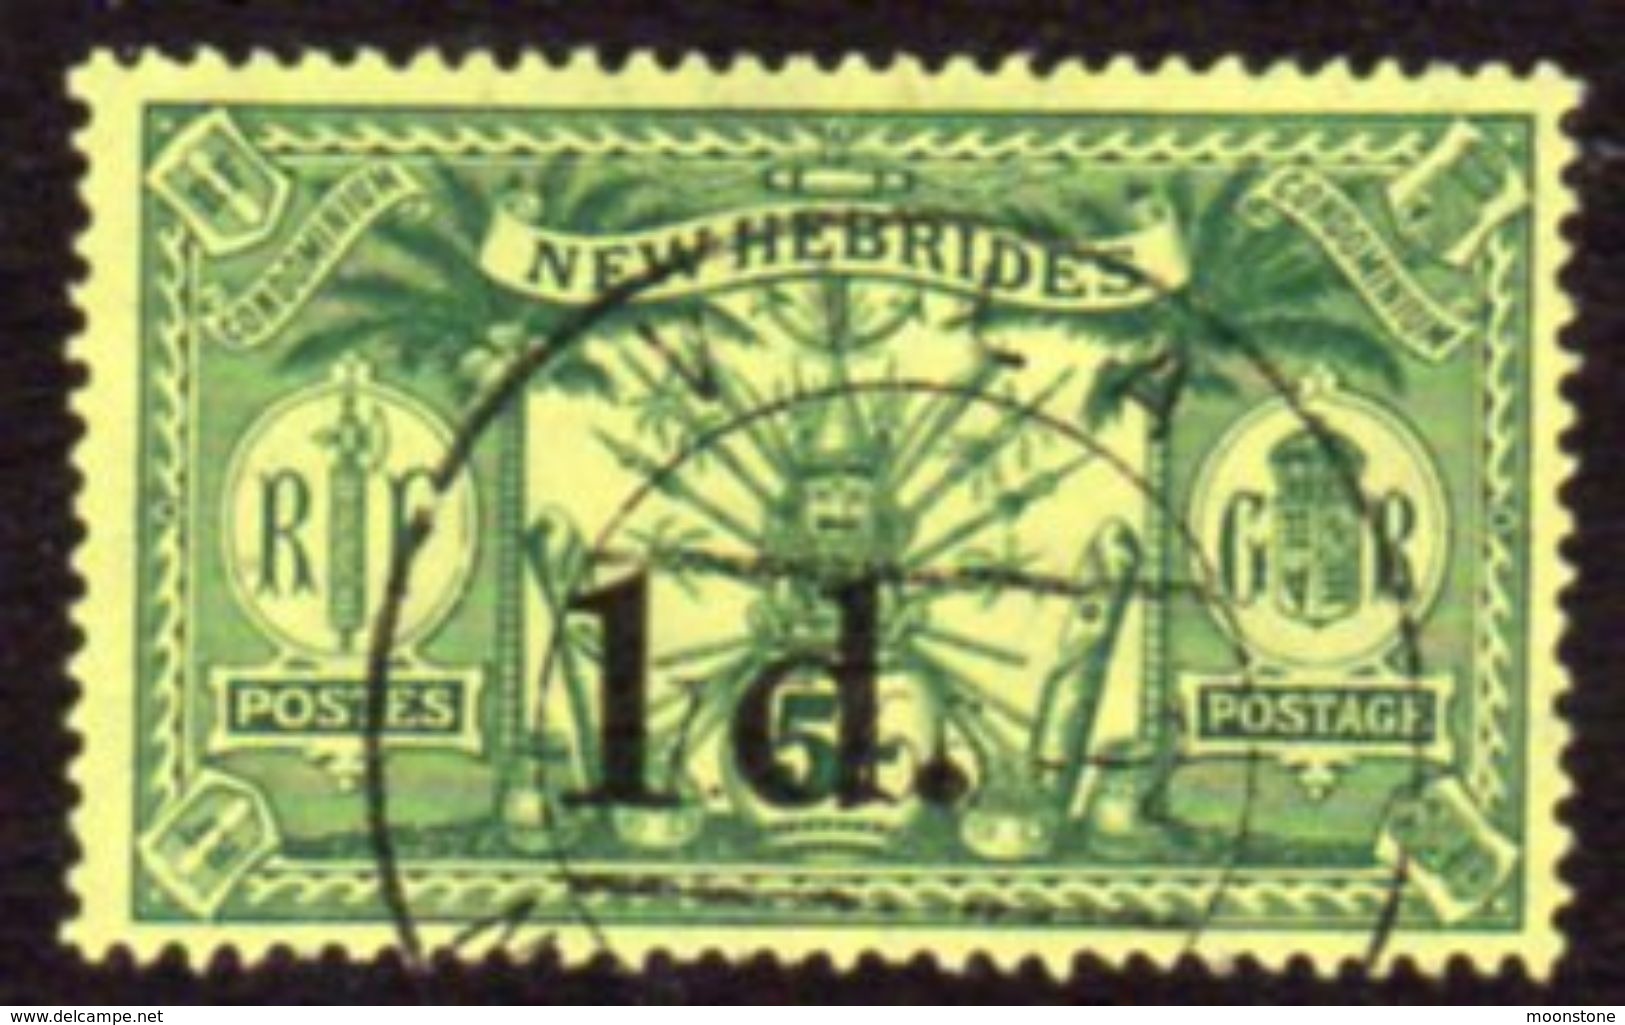 New Hebrides 1920-1 1d On 5/- Surcharge, Wmk. Mult. Crown CA, Used, SG 33 - Used Stamps